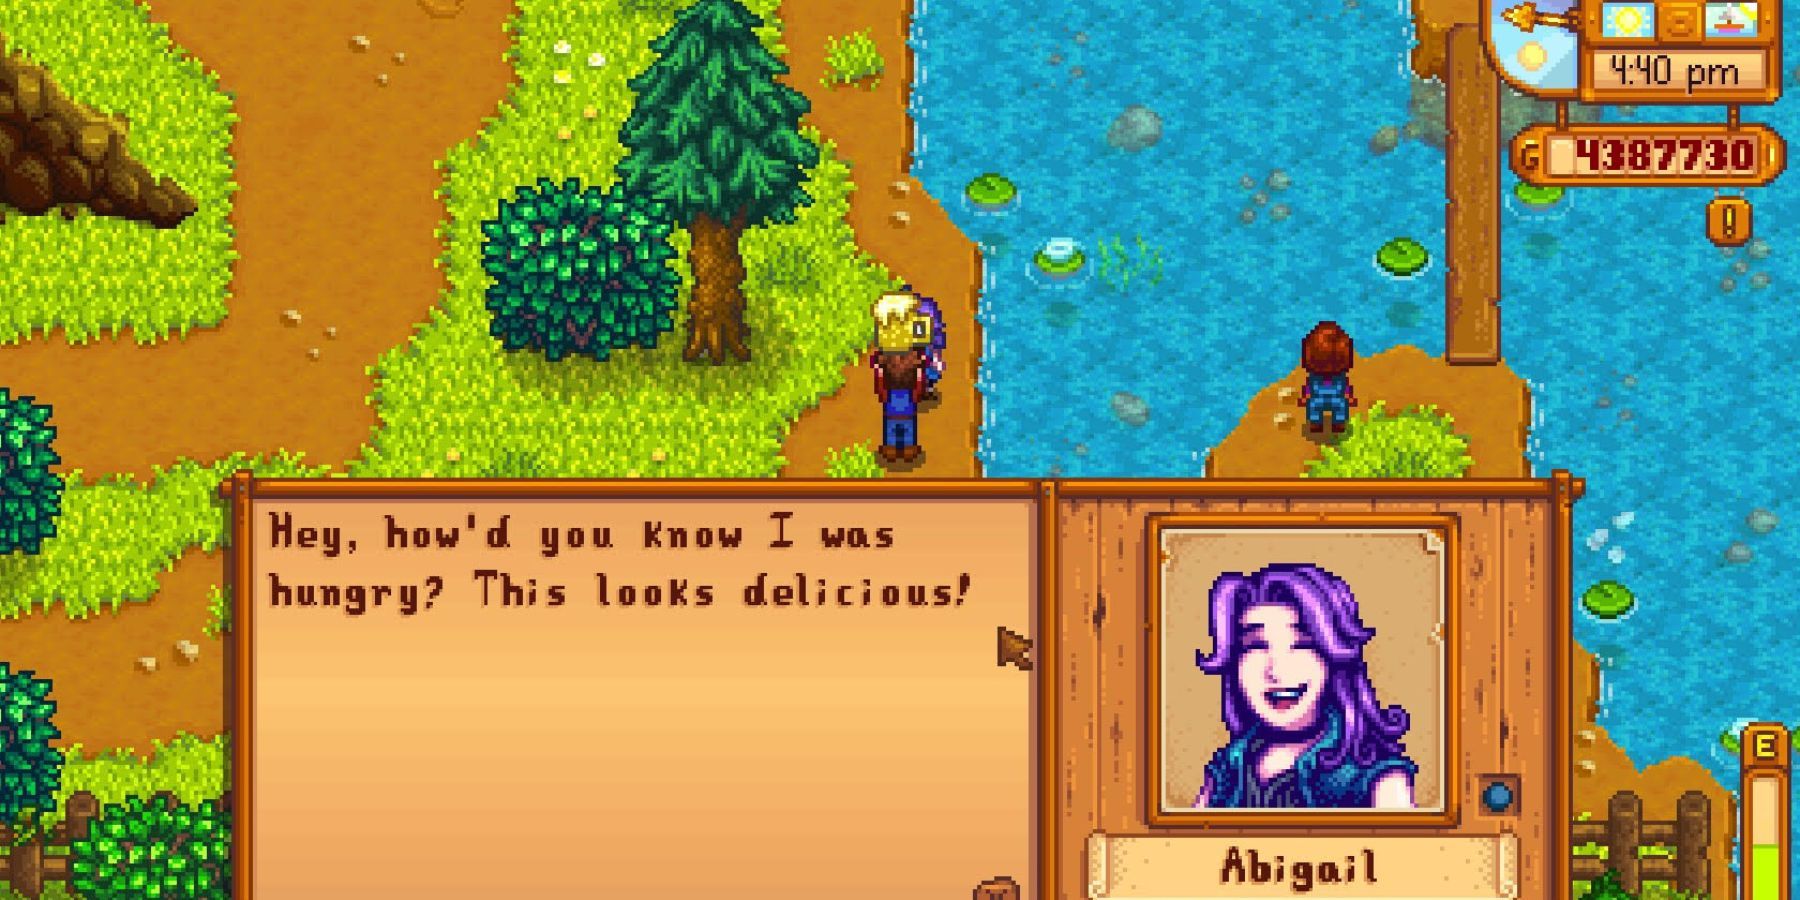 abigails reaction after getting a gift stardew valley